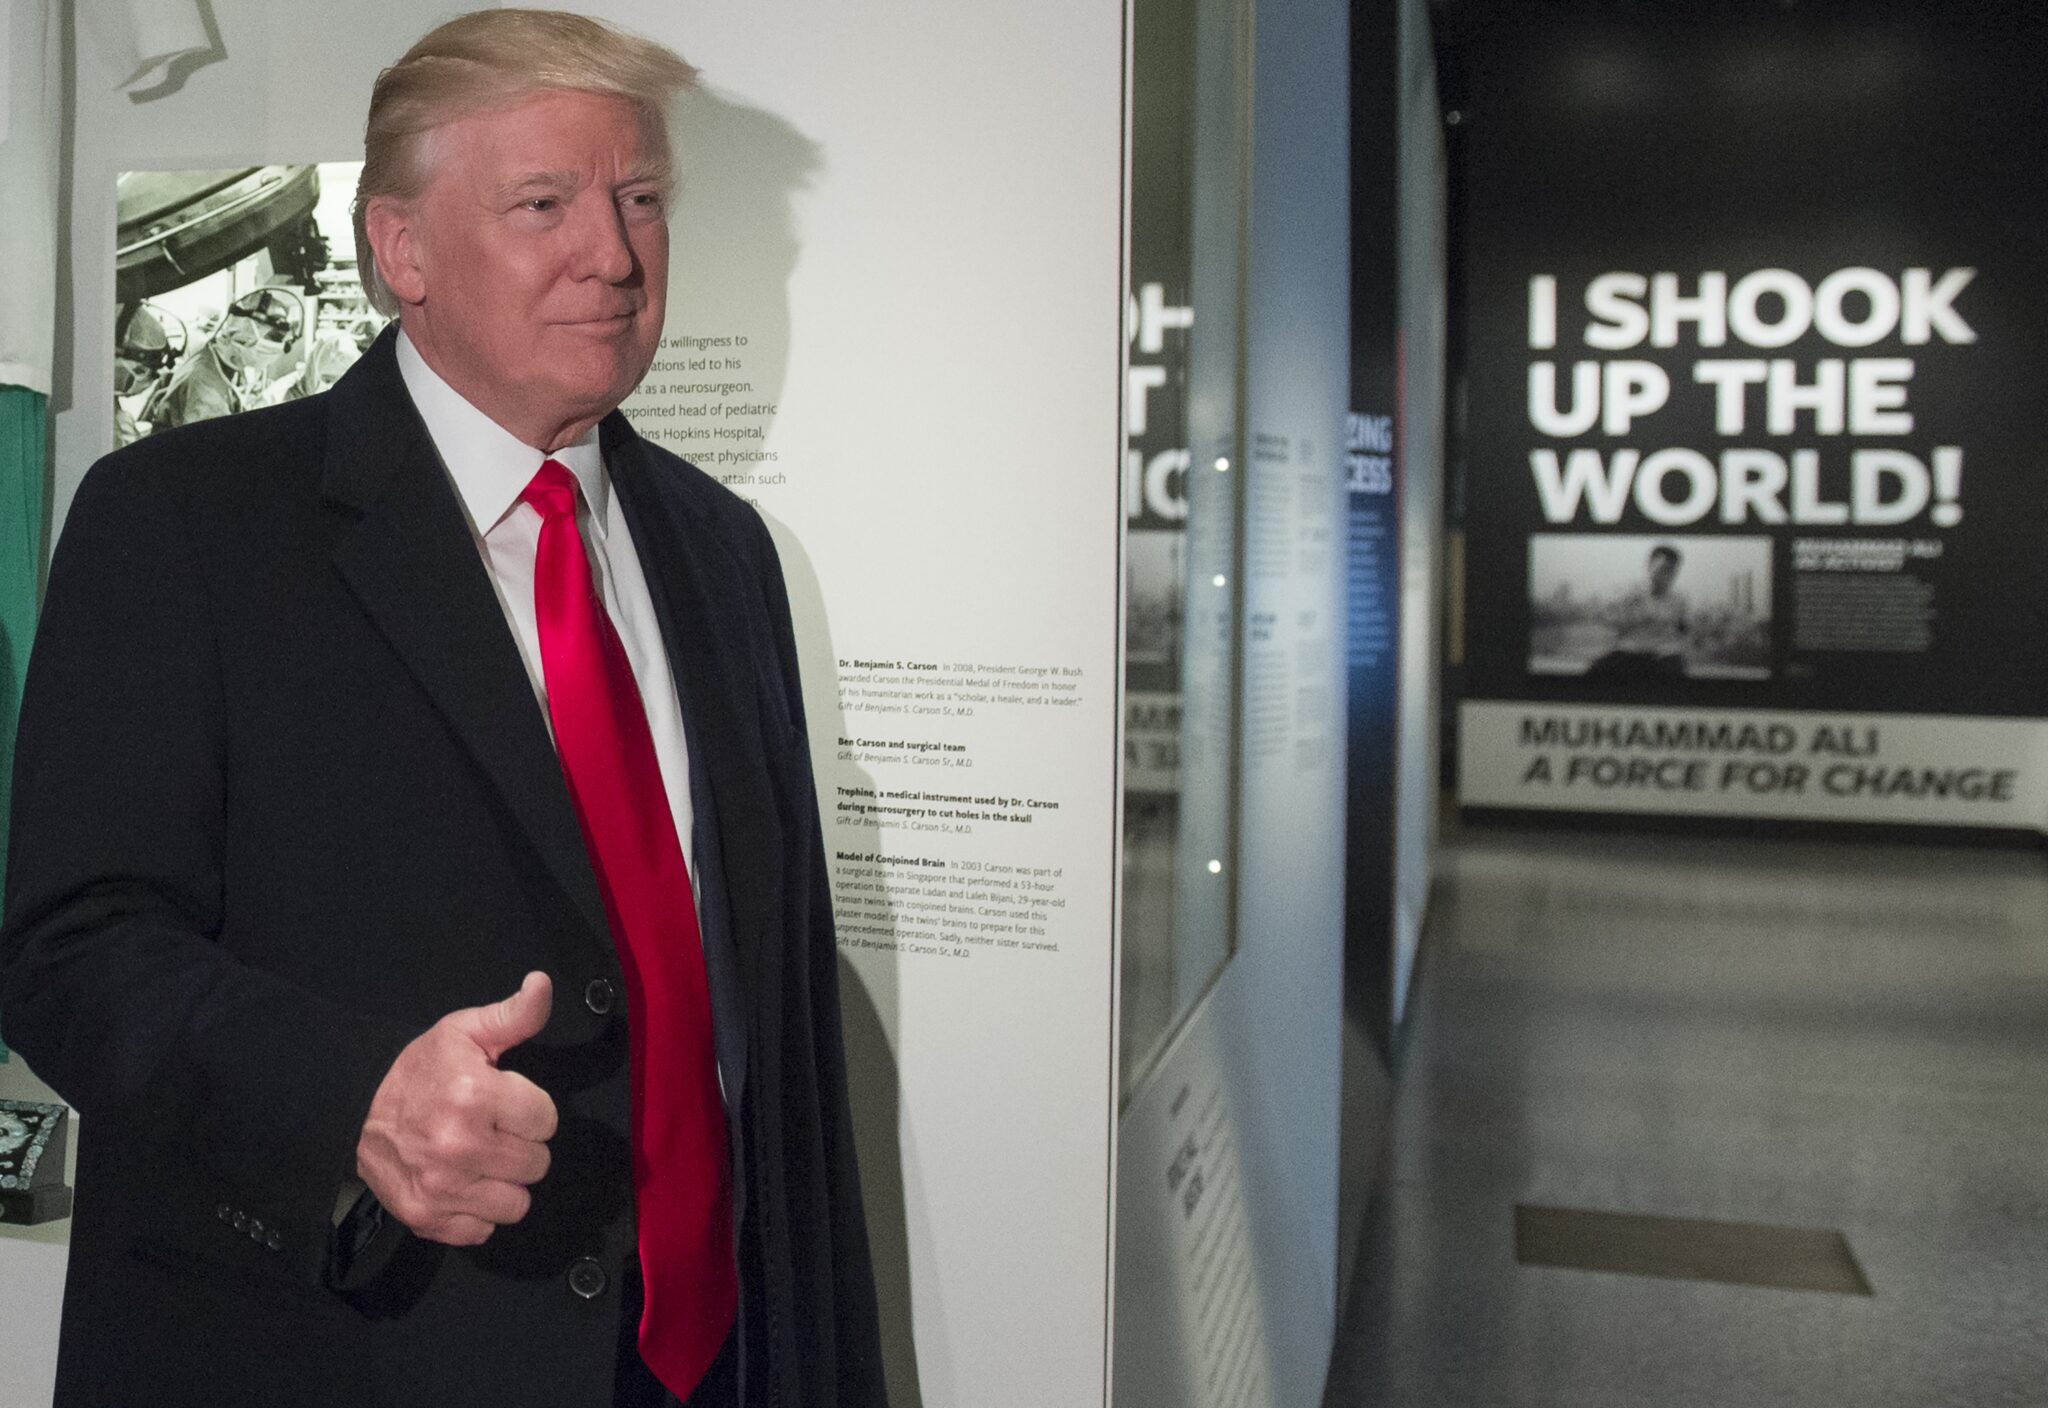 US President Donald Trump gives a thumbs-up as he tours the Smithsonian National Museum of African American History and Culture in Washington, DC, February 21, 2017. / AFP / SAUL LOEB        (Photo credit should read SAUL LOEB/AFP via Getty Images)